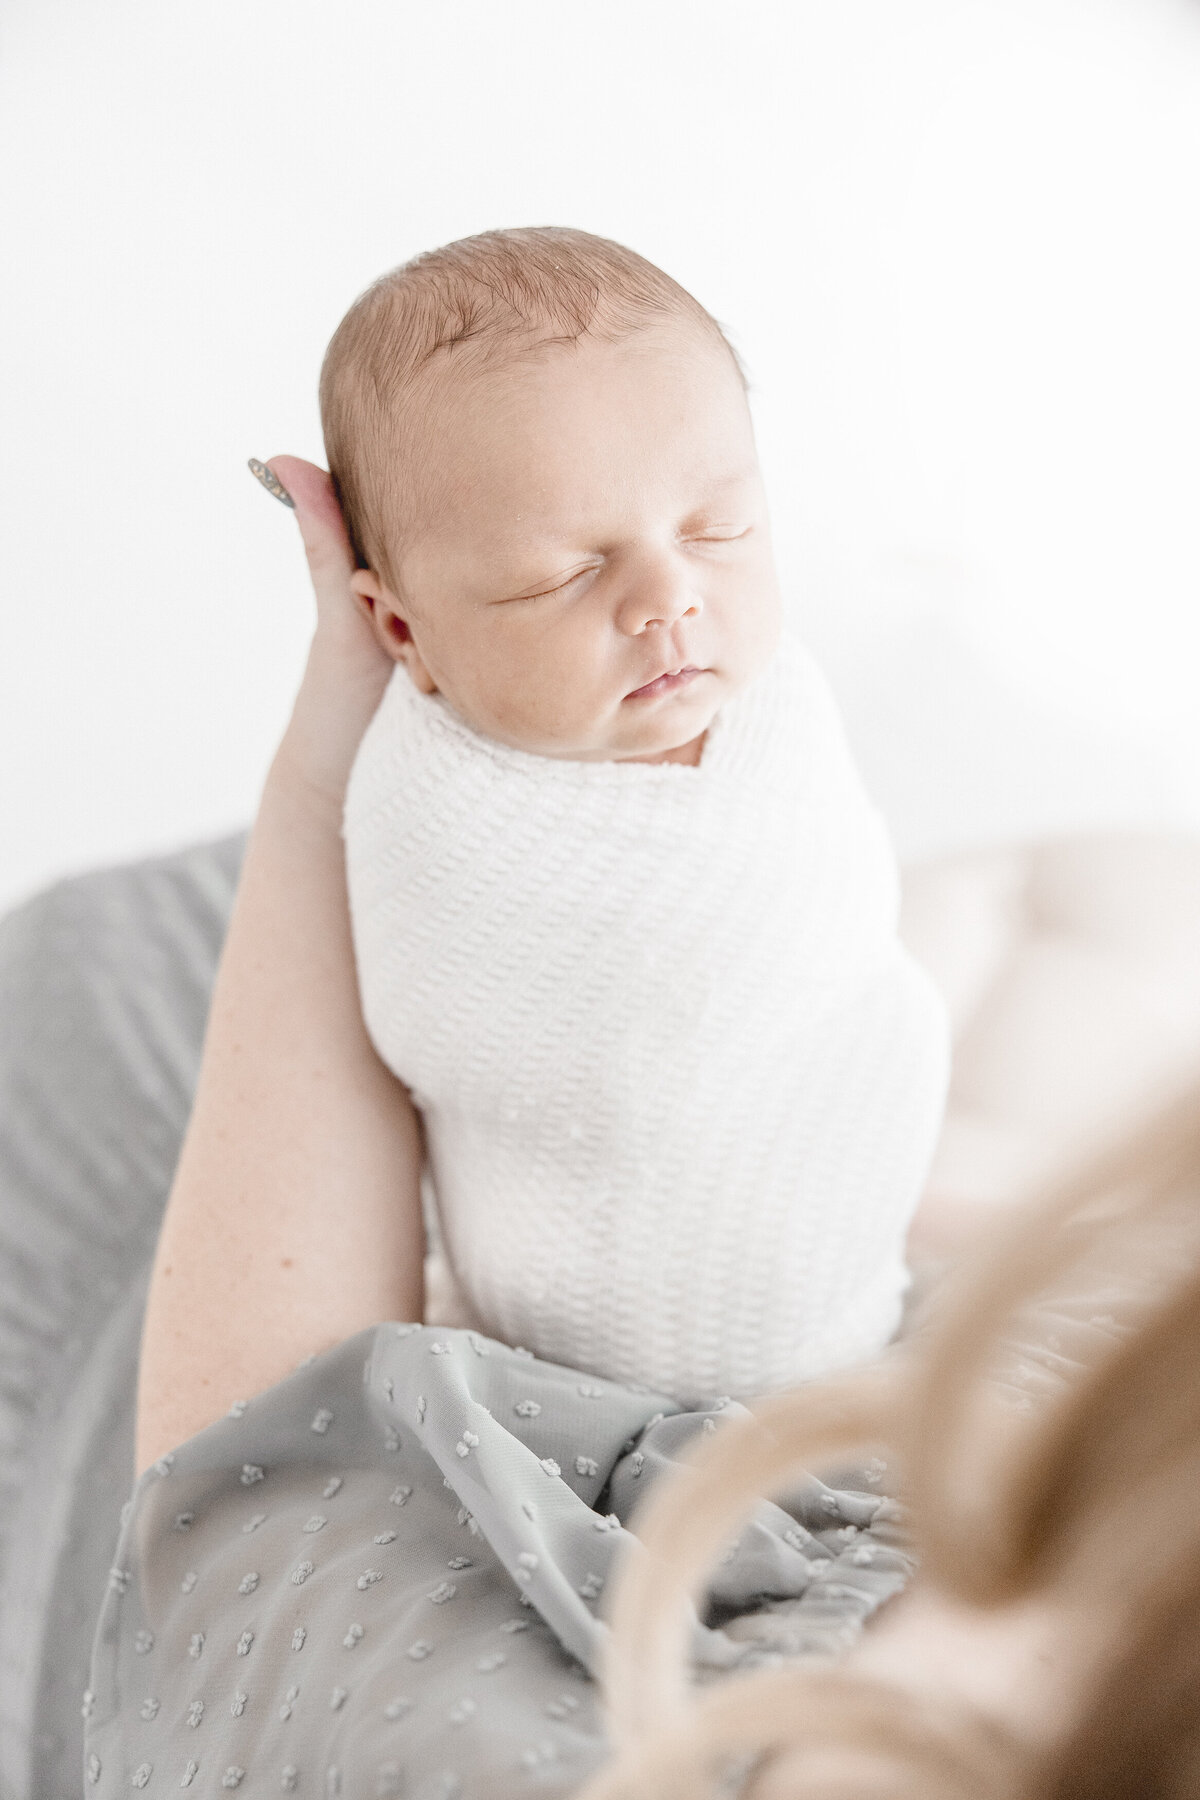 Baby sleeping white wrap being held by mother